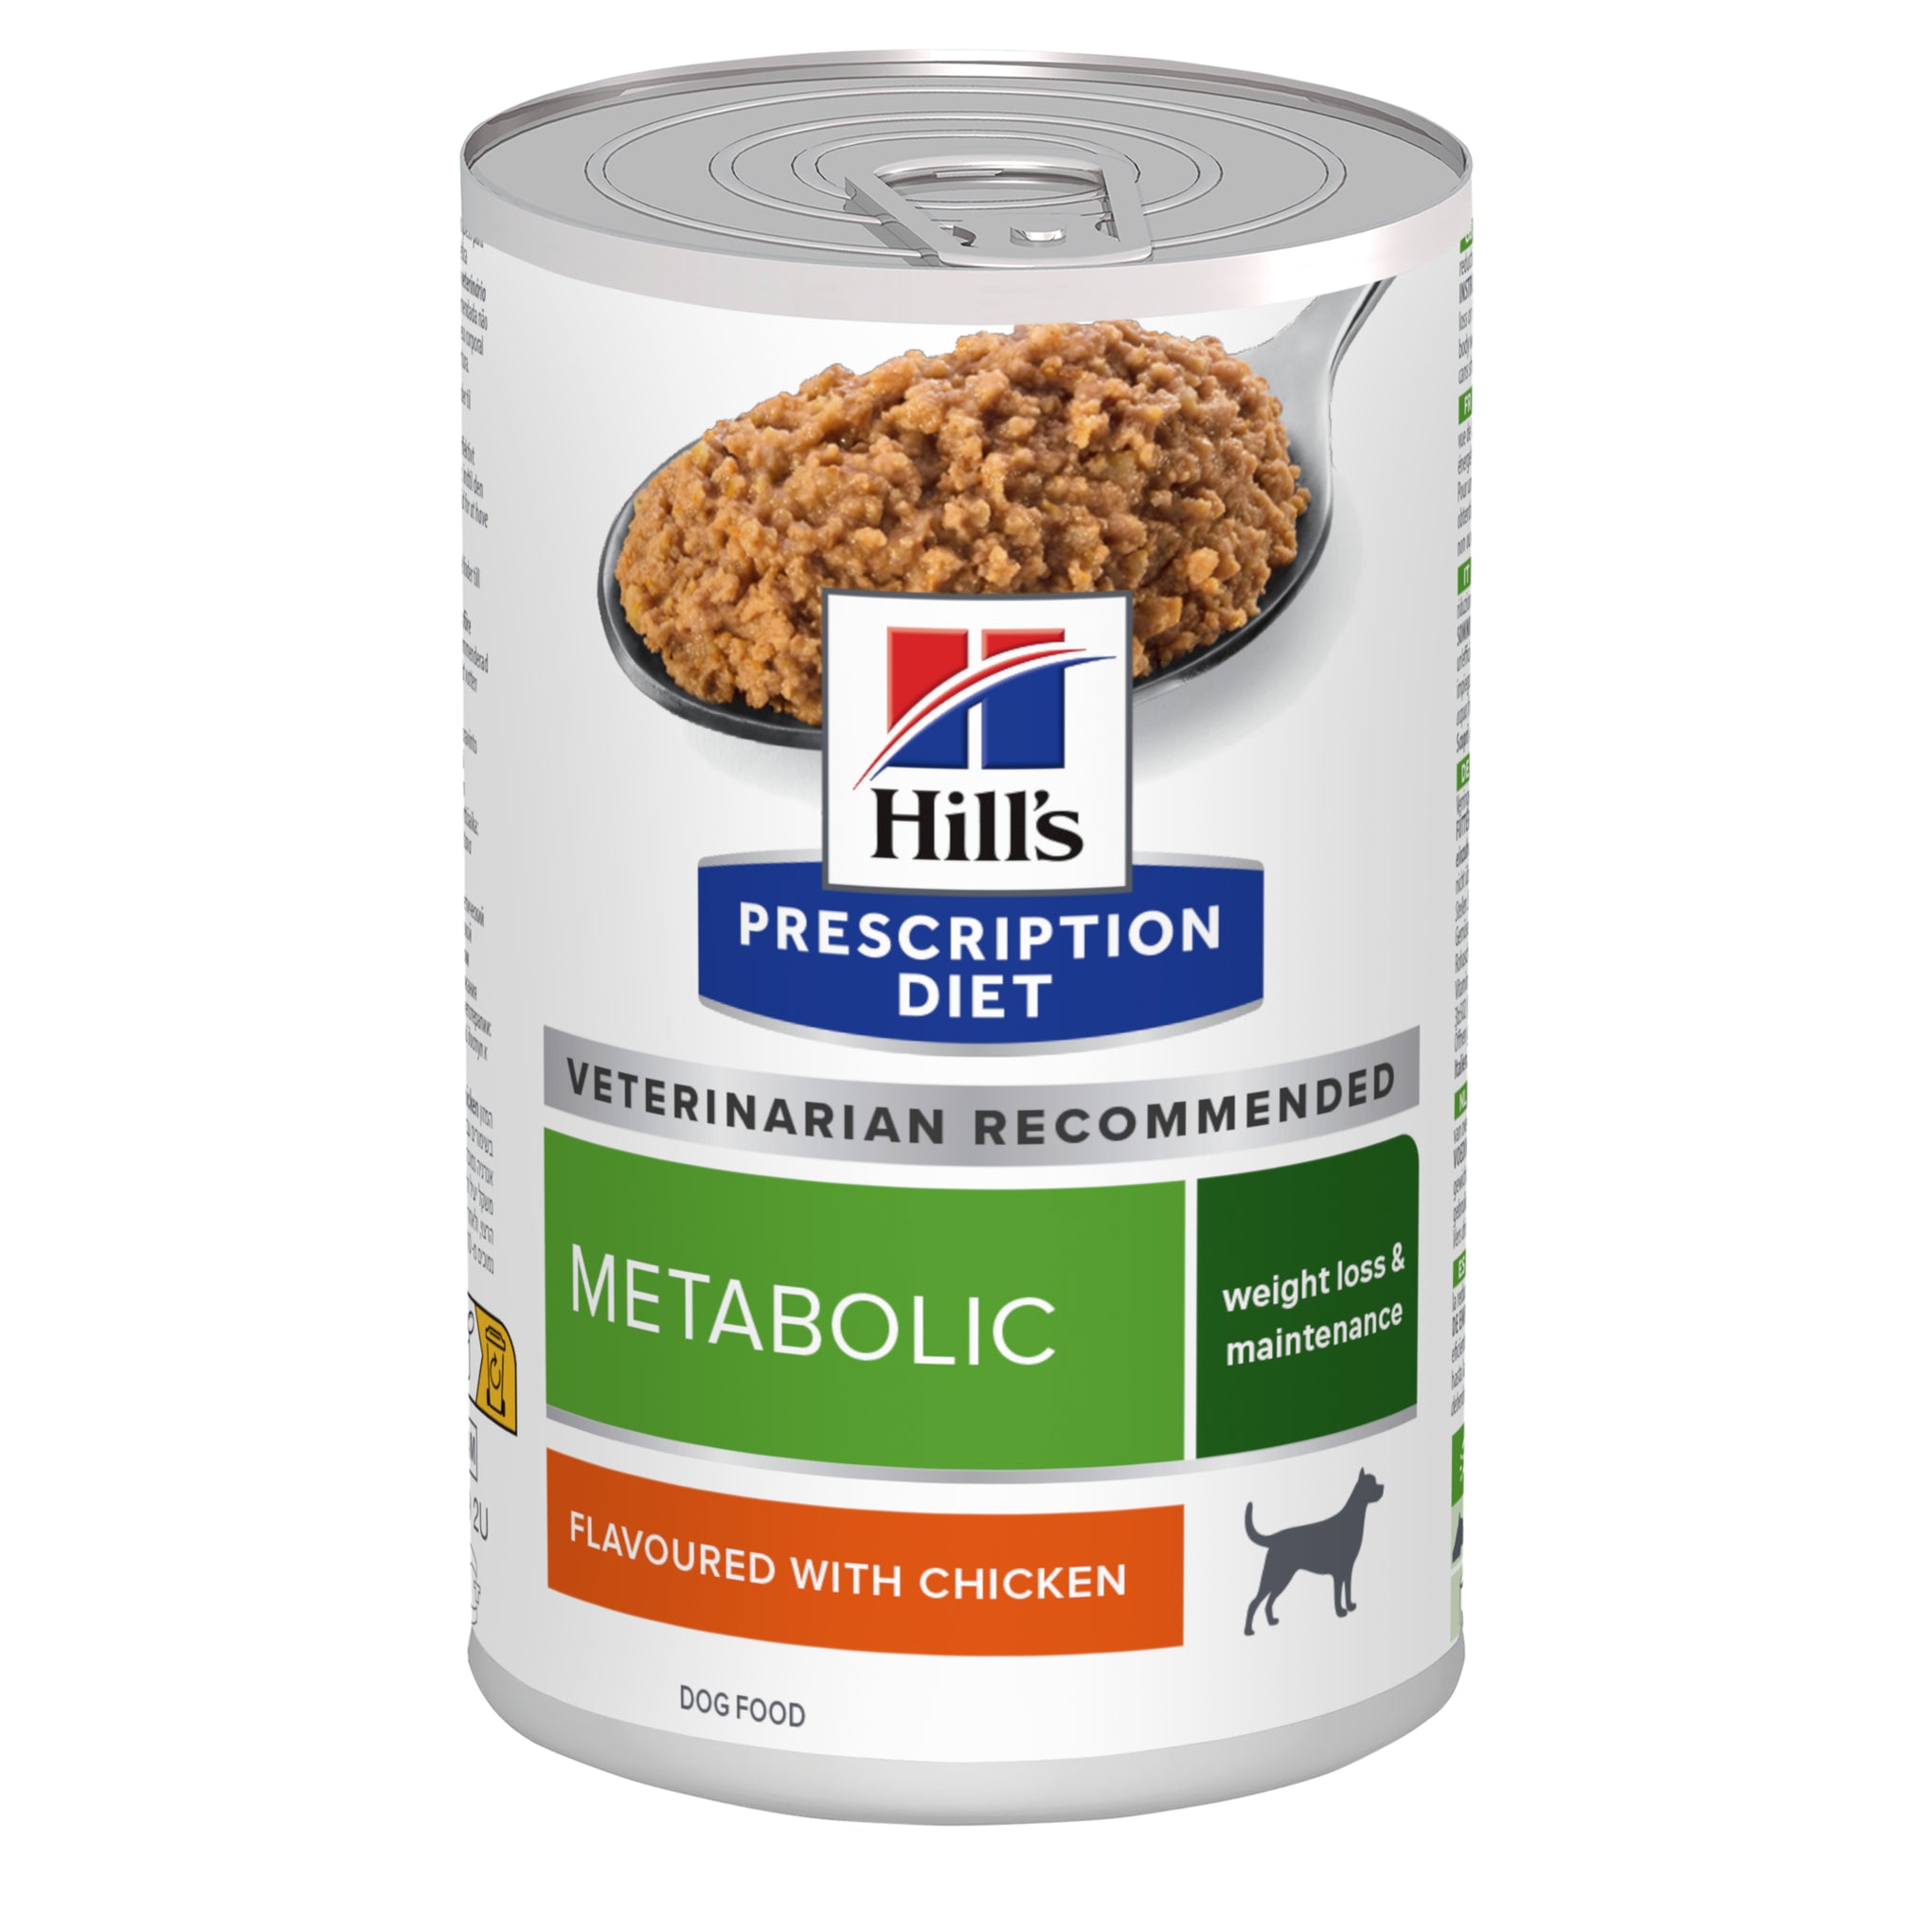 Hill's Prescription Diet Metabolic Weight Management Canned Dog Food 370g x 12